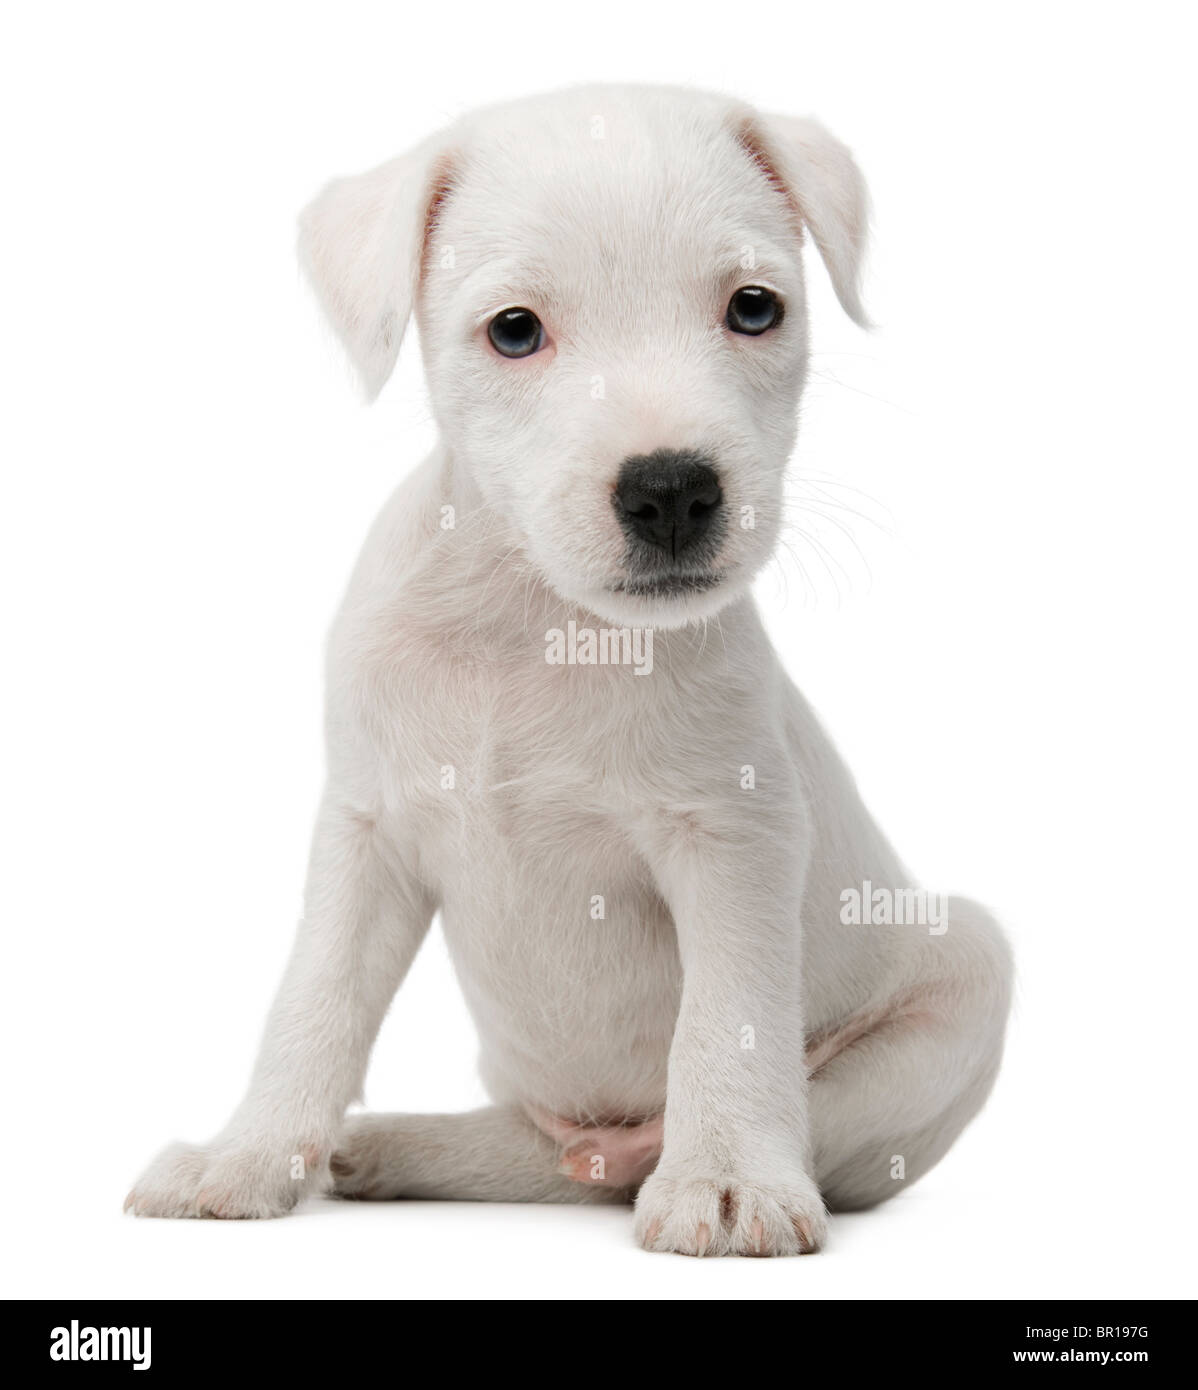 Parson Russell Terrier puppy sitting in front of white background Stock Photo